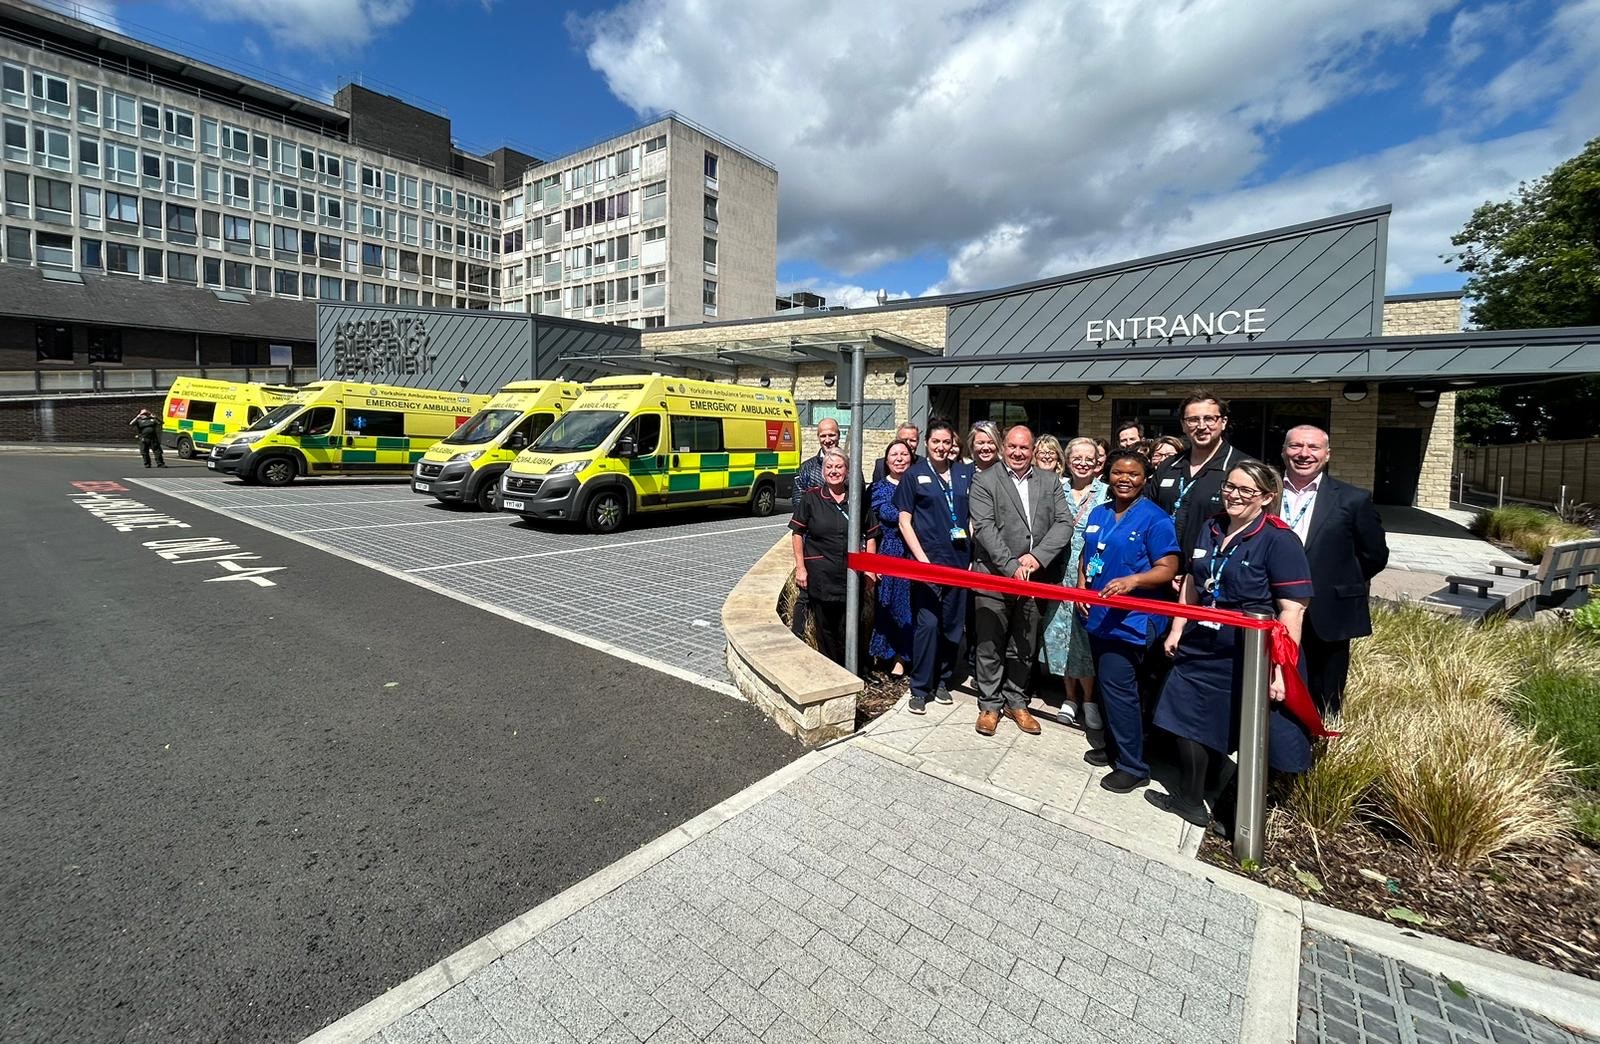 Dr Mark Davies and colleagues stand in front of the new A&E cutting a red ribbon. There are ambulances in the background